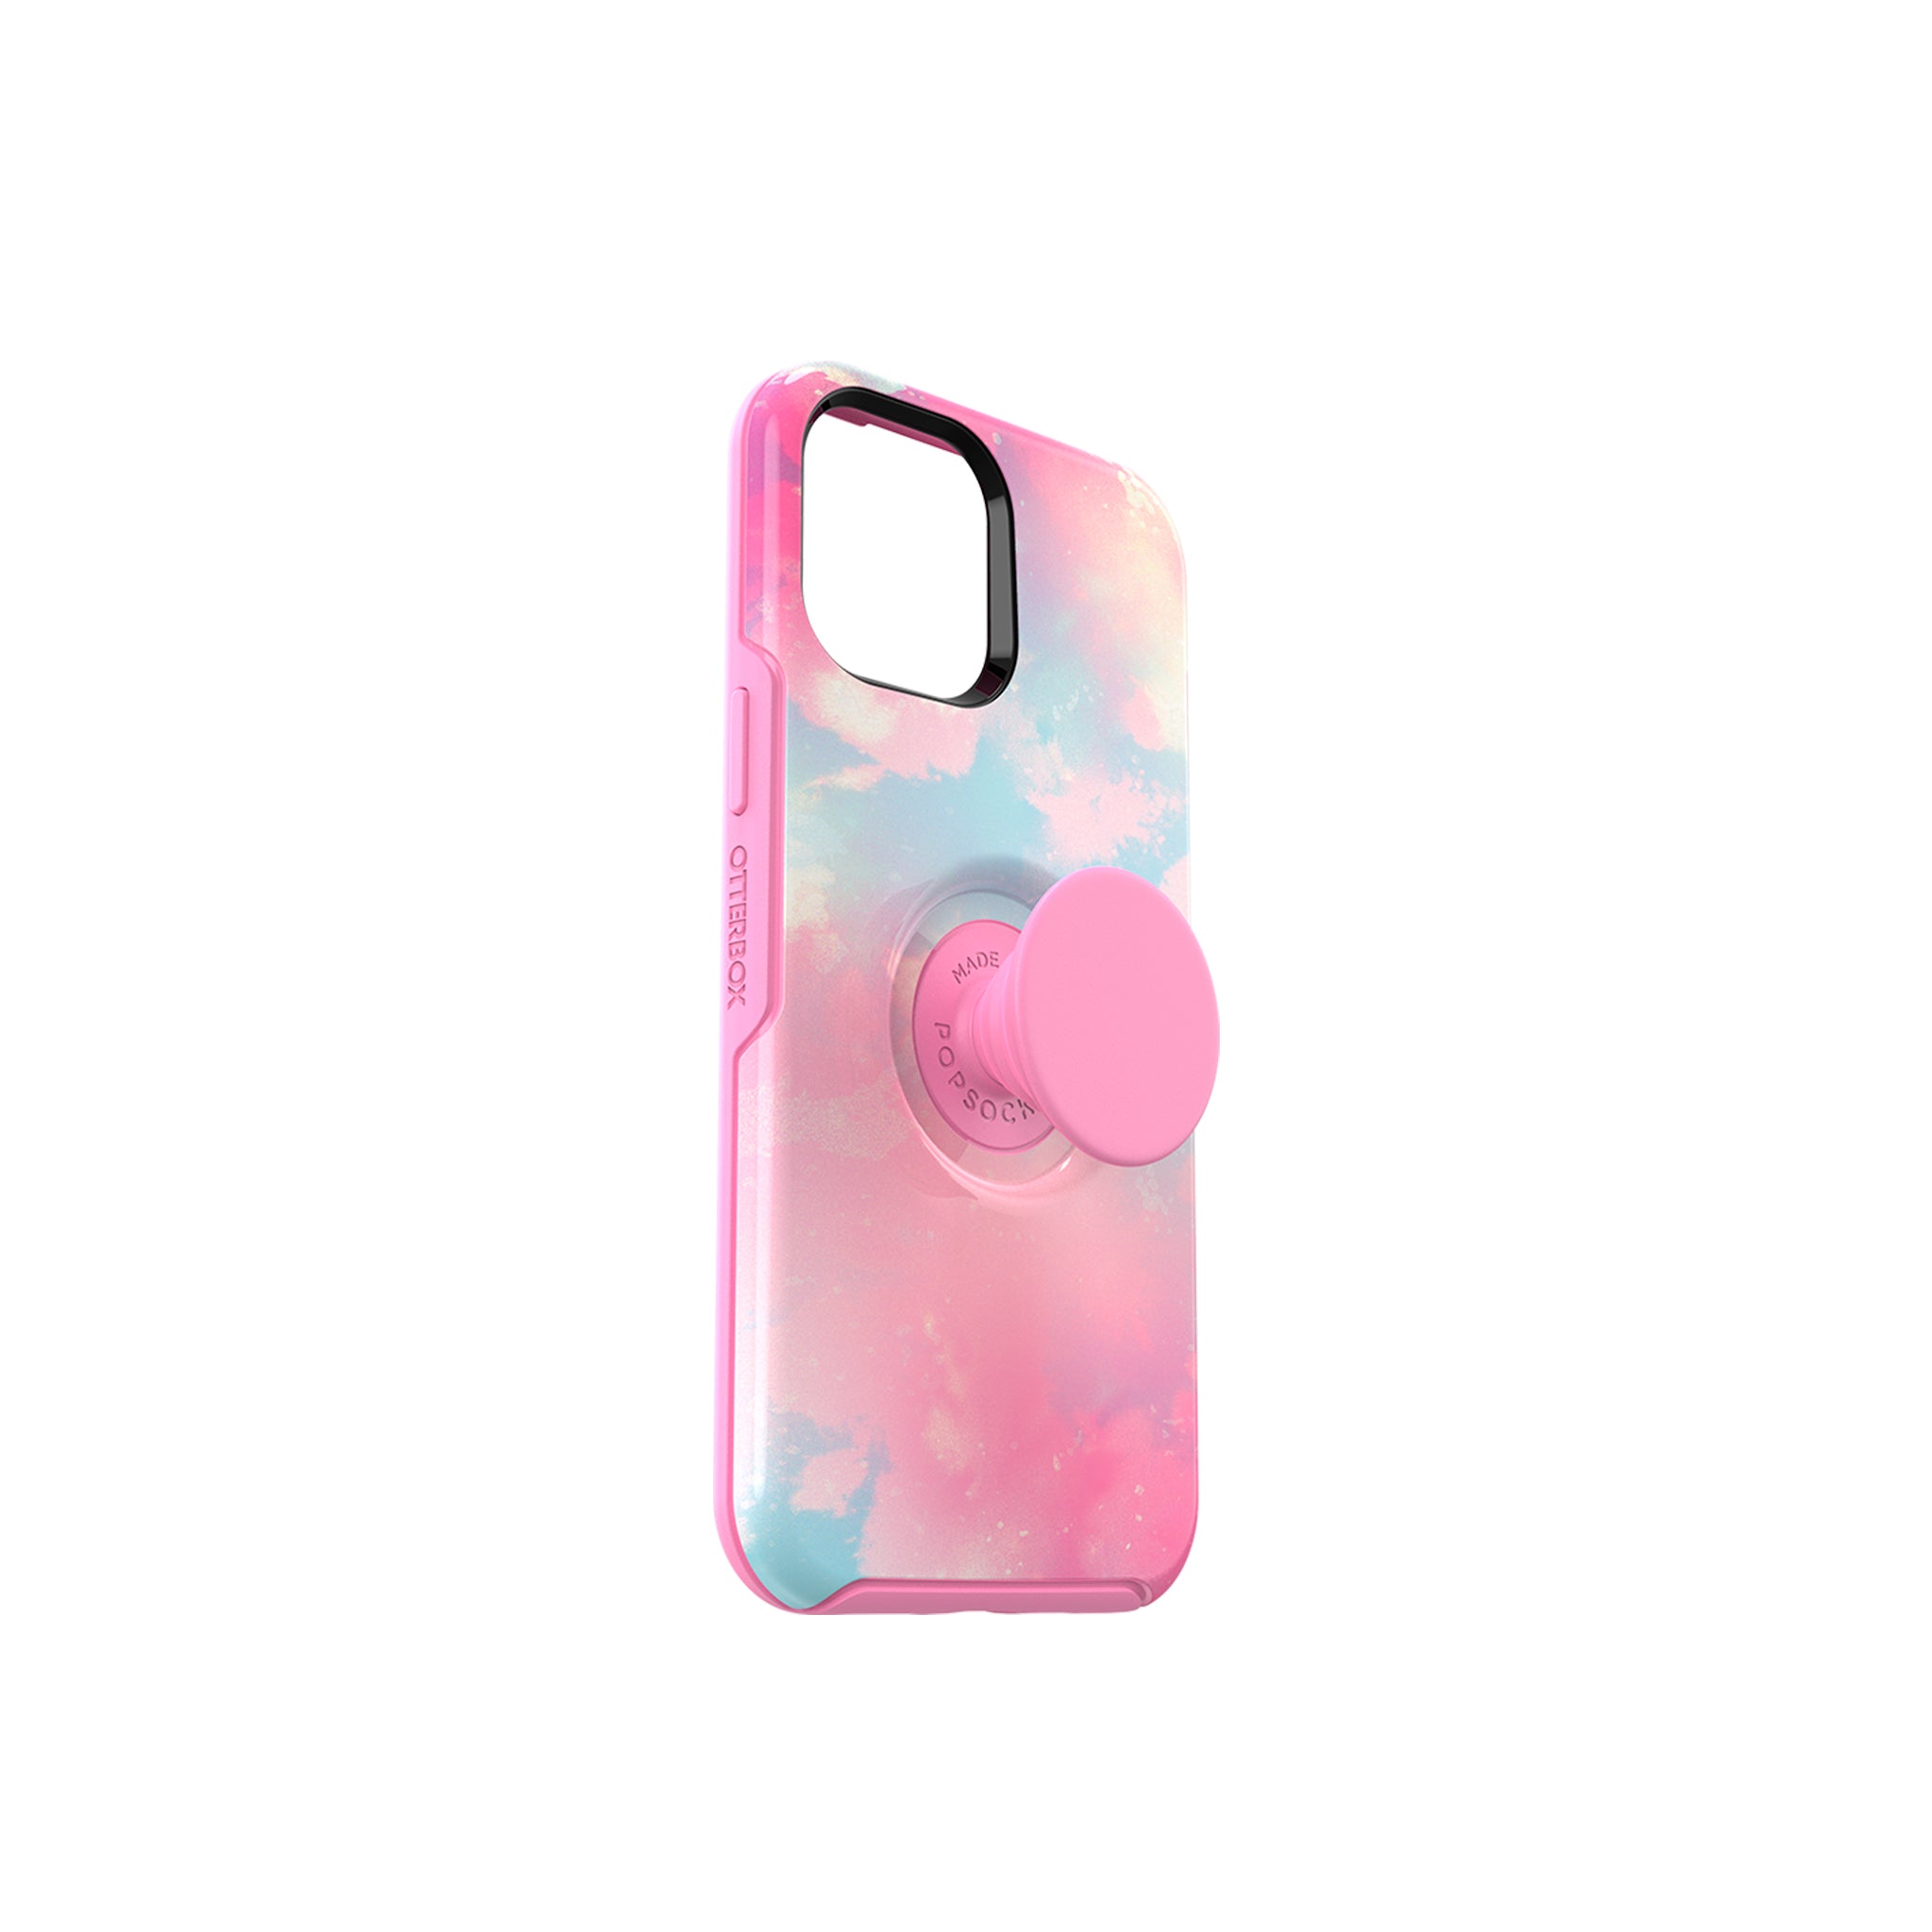 OtterBox - Otter + Pop Symmetry for Iphone 12 Pro Max - DAYDREAMER